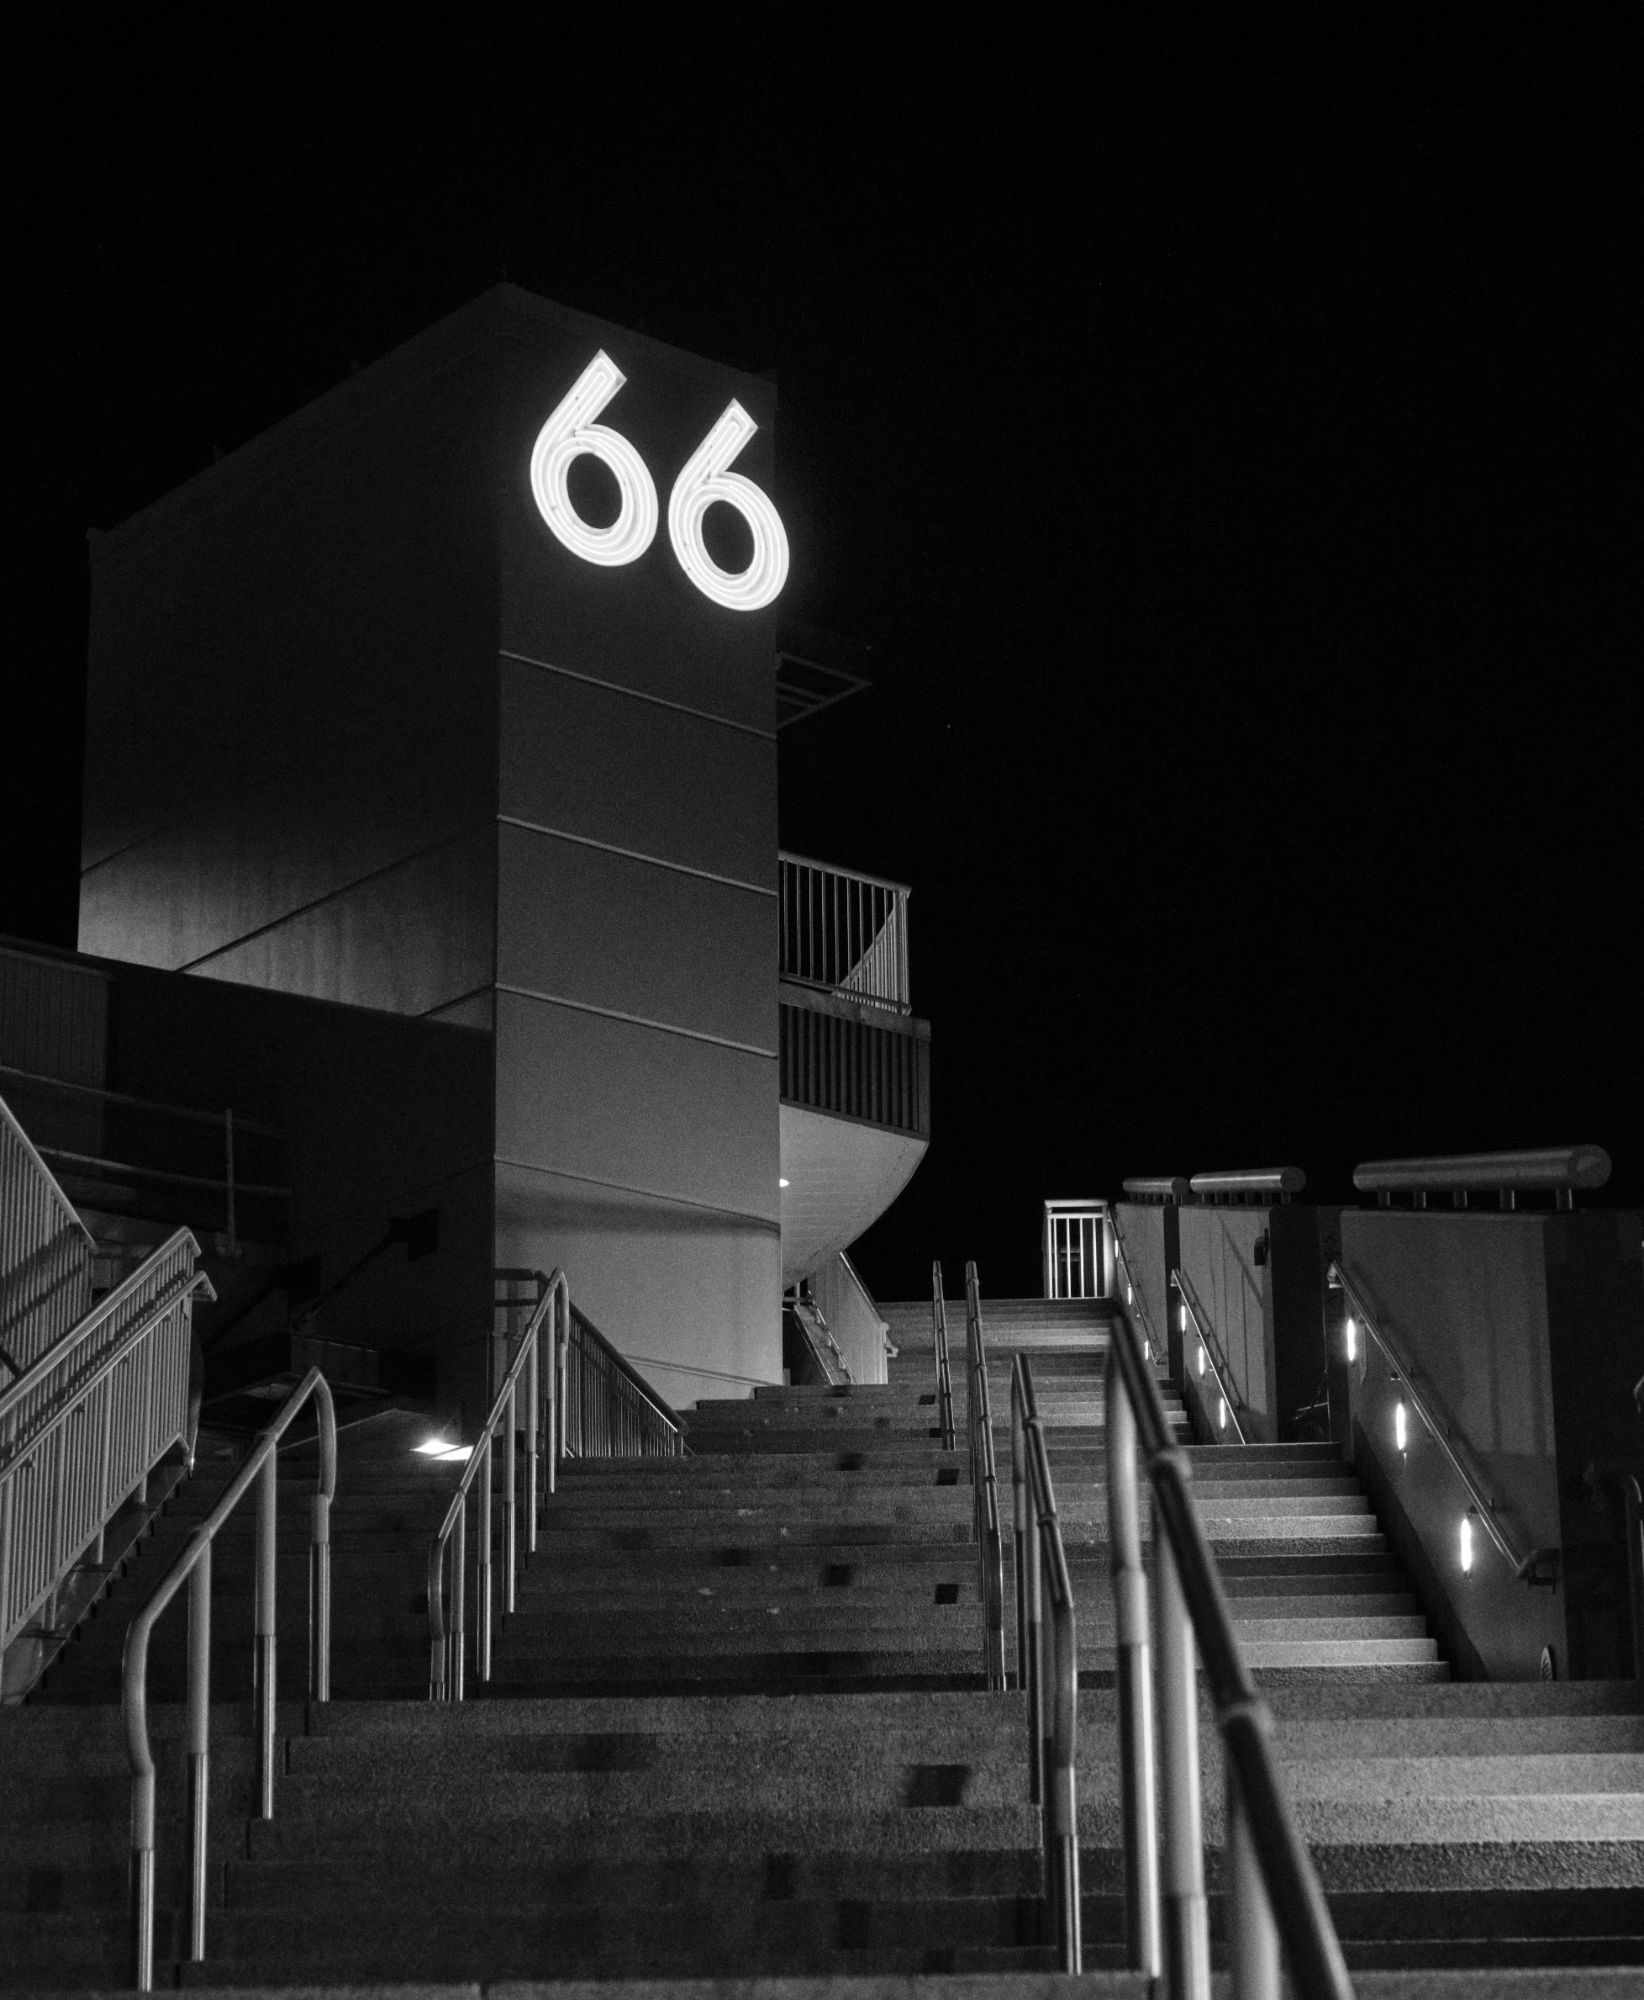 Black and white night photo of pier 66 in Seattle WA